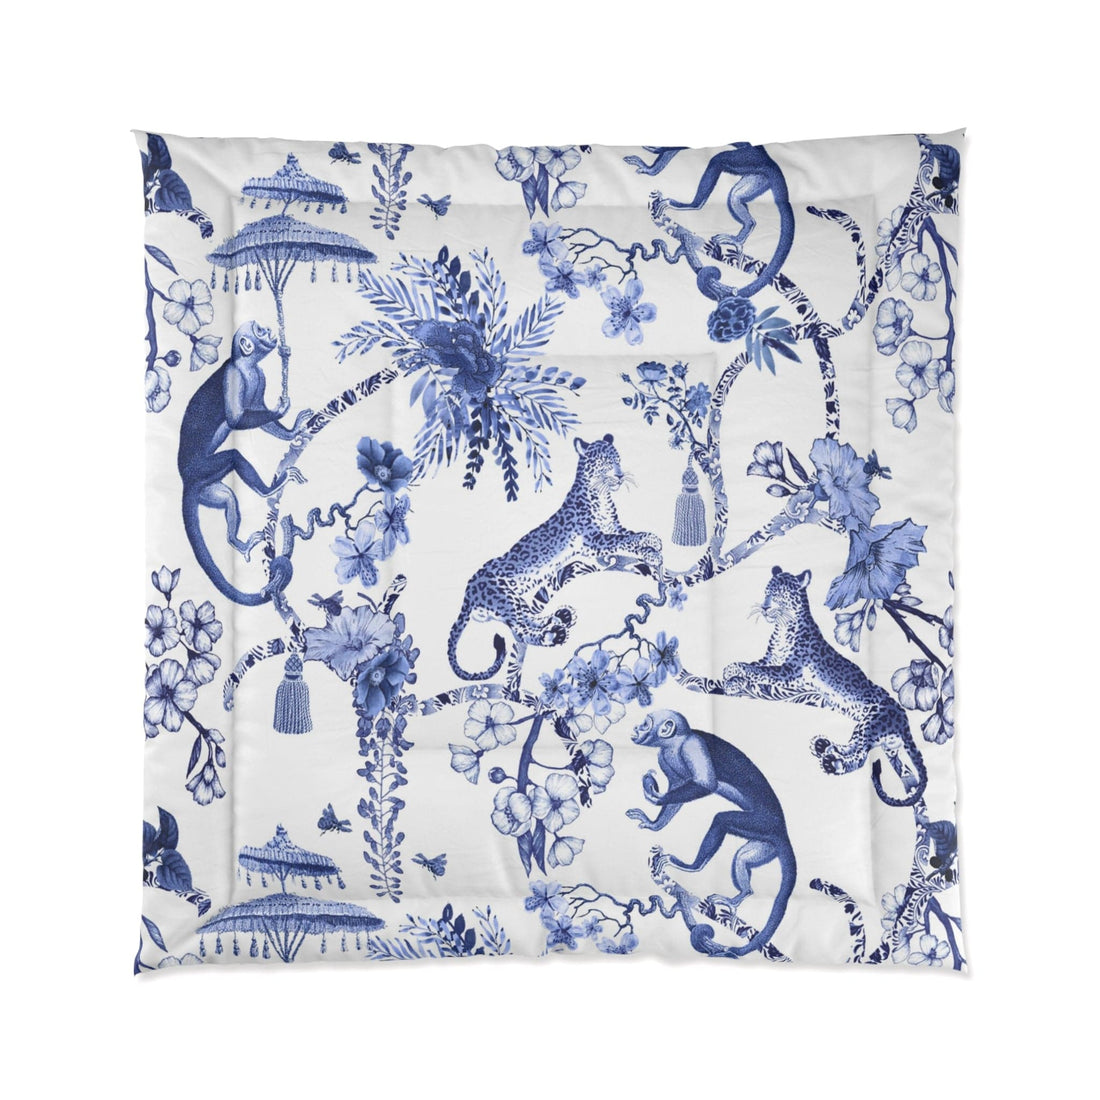 Kate McEnroe New York Floral Blue and White Chinoiserie Jungle Botanical Toile Comforter Comforters